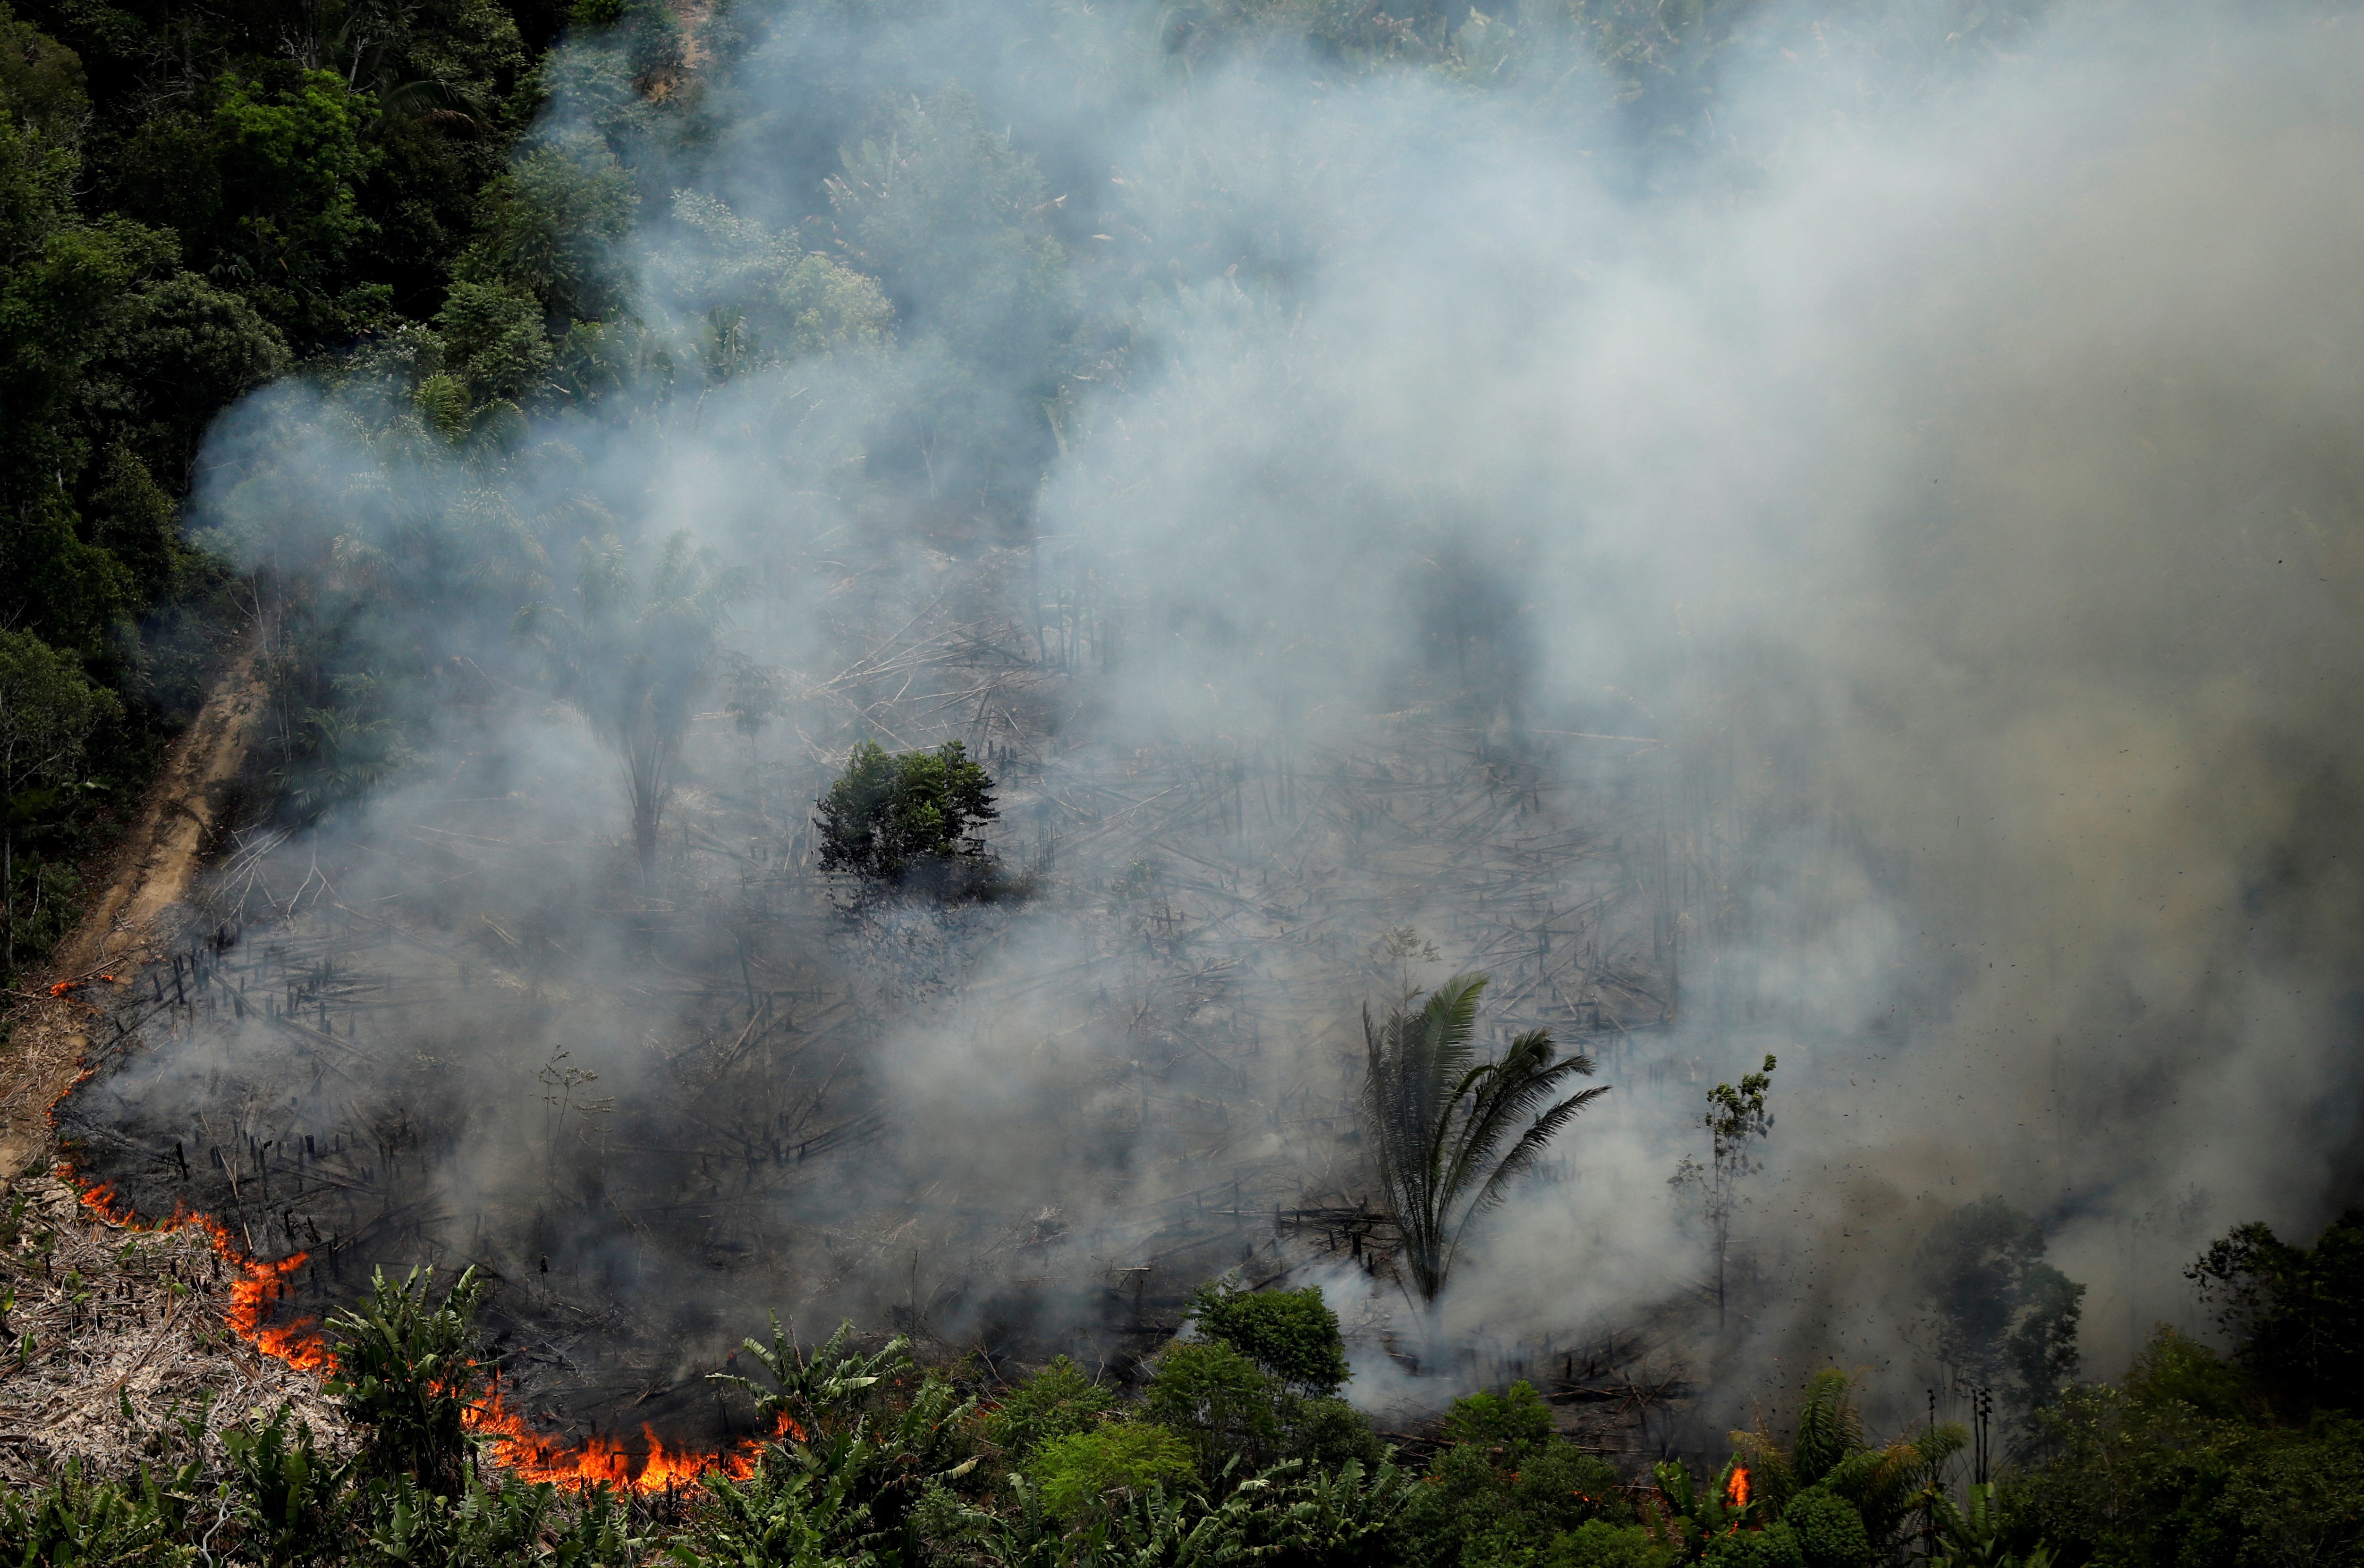 An aerial view shows a fire in an area of the Amazon rainforest near Porto Velho